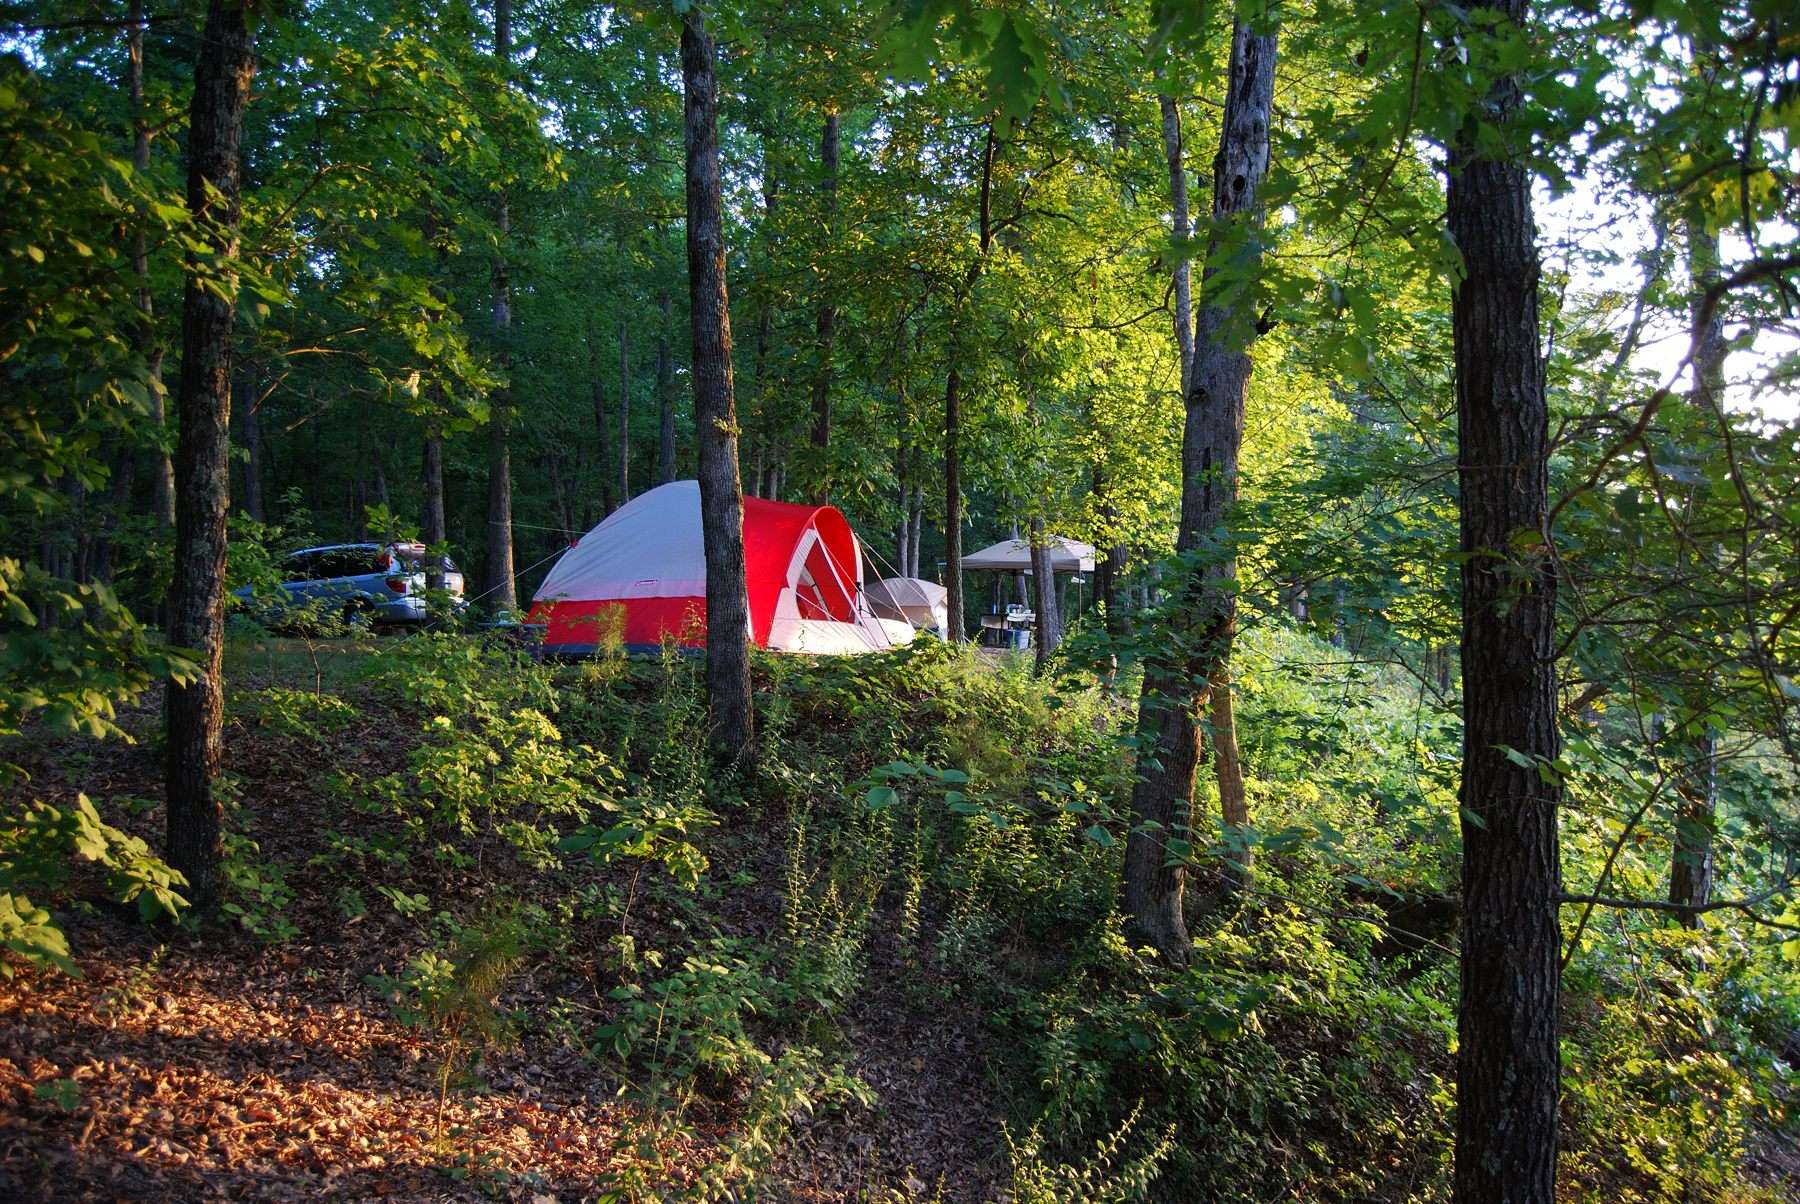 Camping in the Ozarks